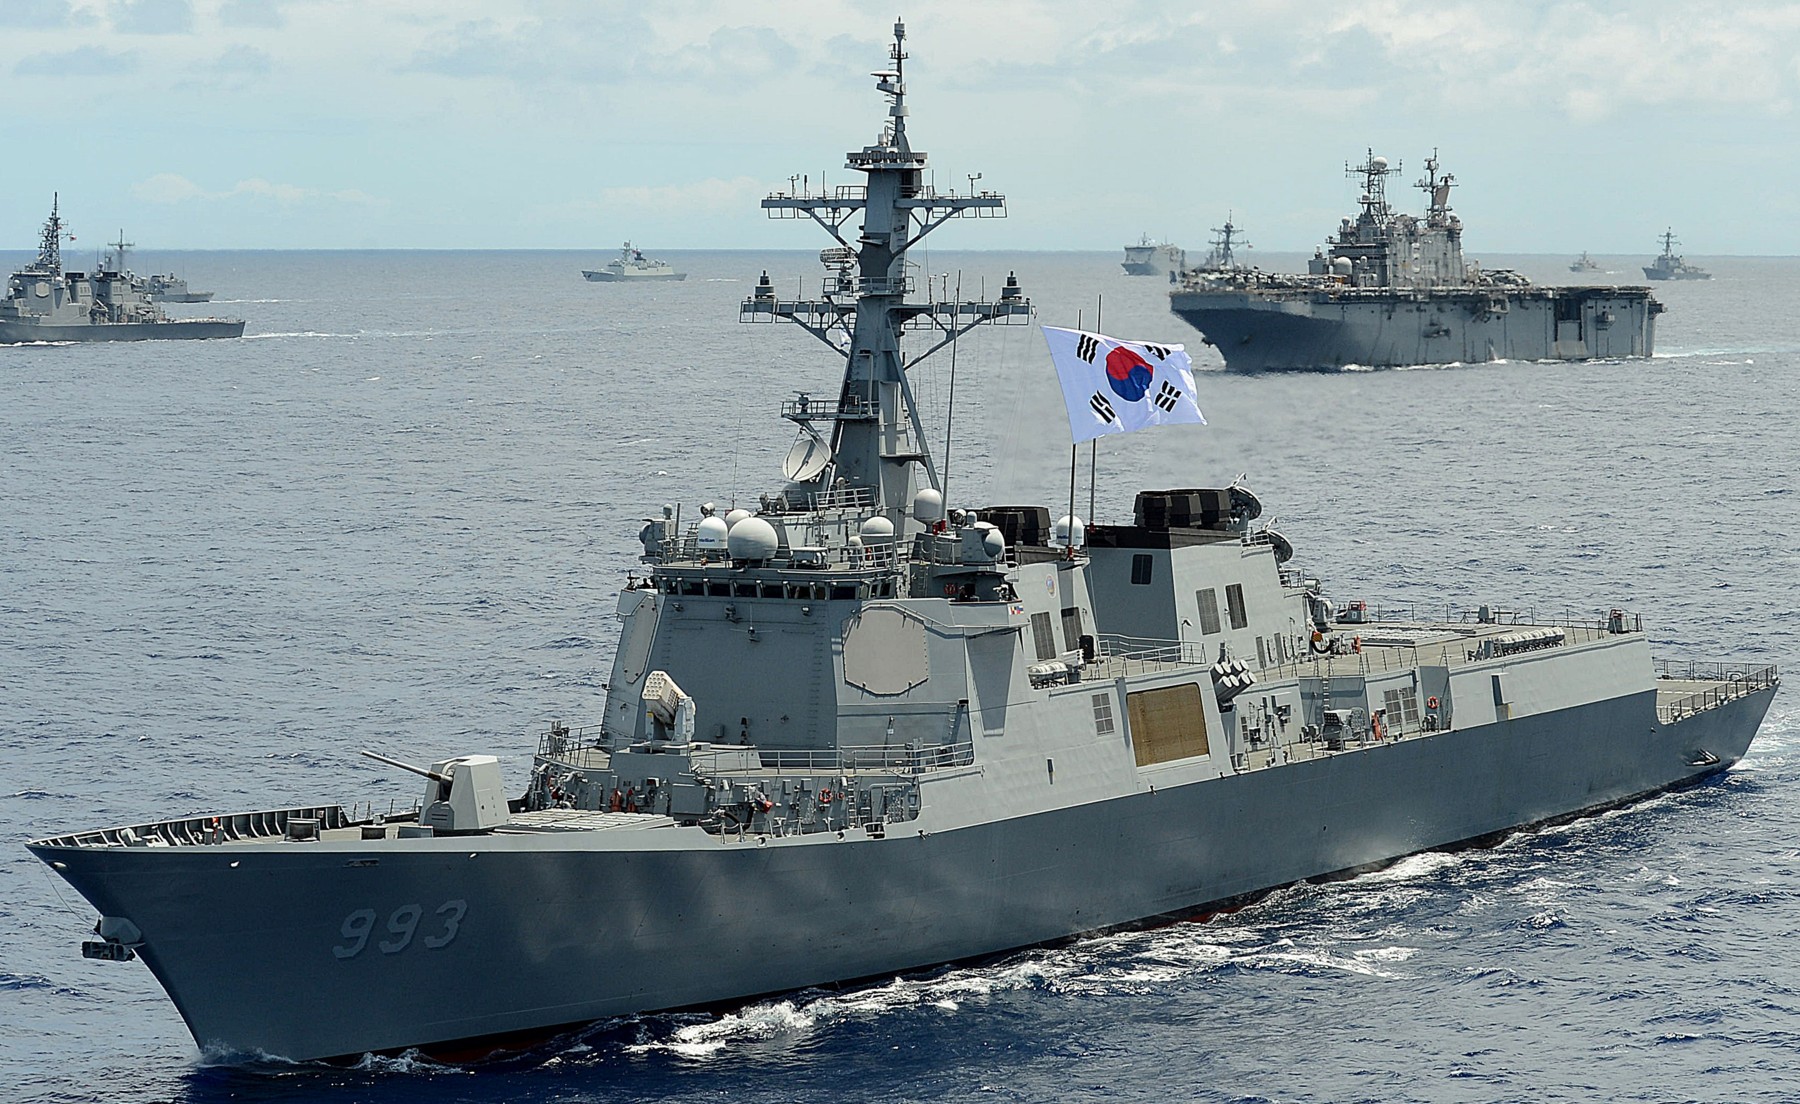 ddg-993 roks seoae ryu seong-ryong sejong the great class guided missile destroyer aegis republic of korea navy rokn 22